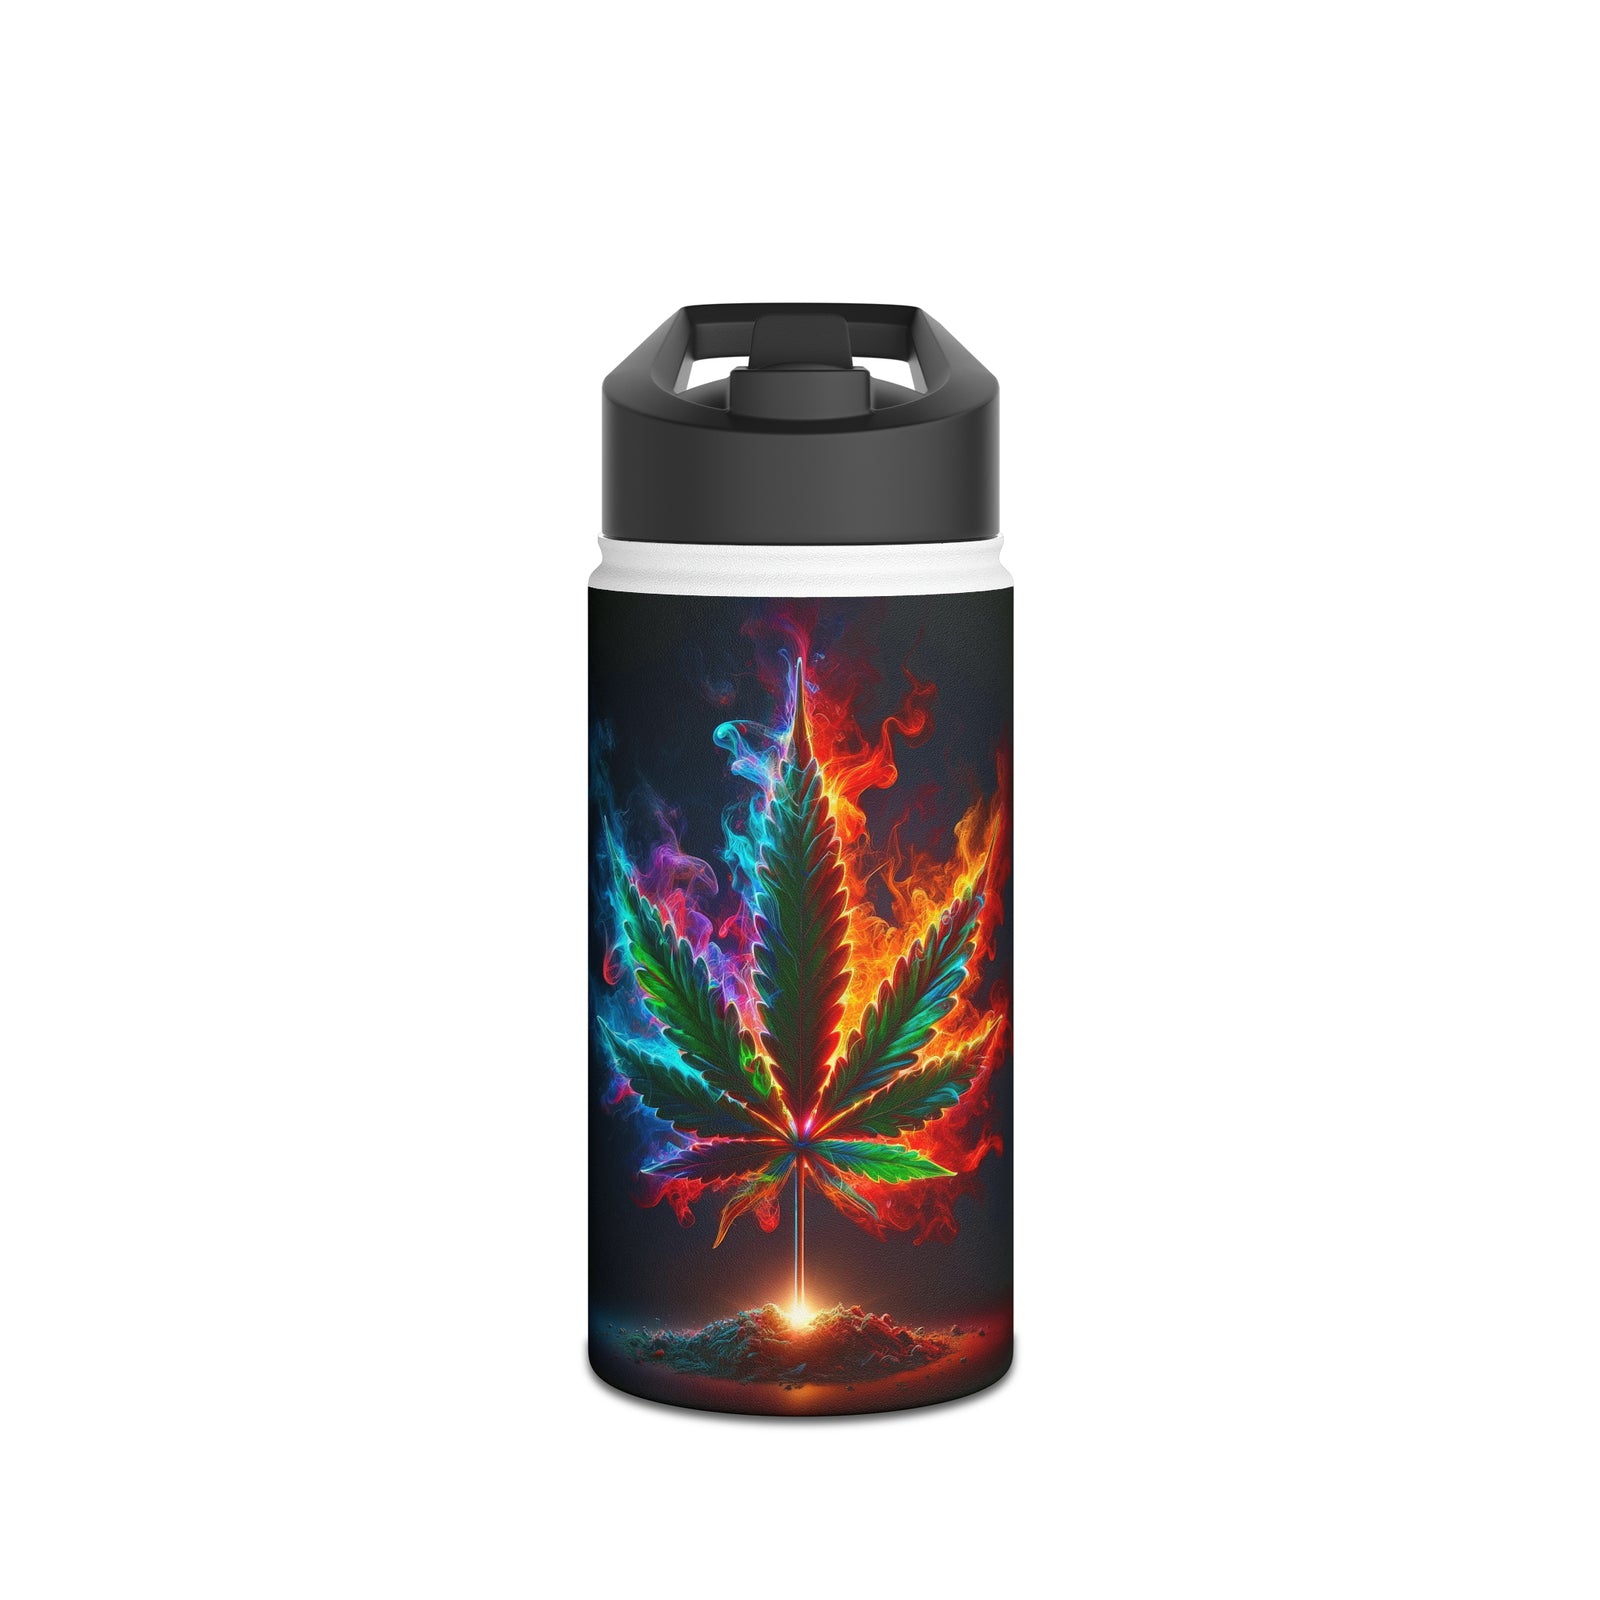 Flames of Tranquility Stainless Steel Water Bottle, Standard Lid